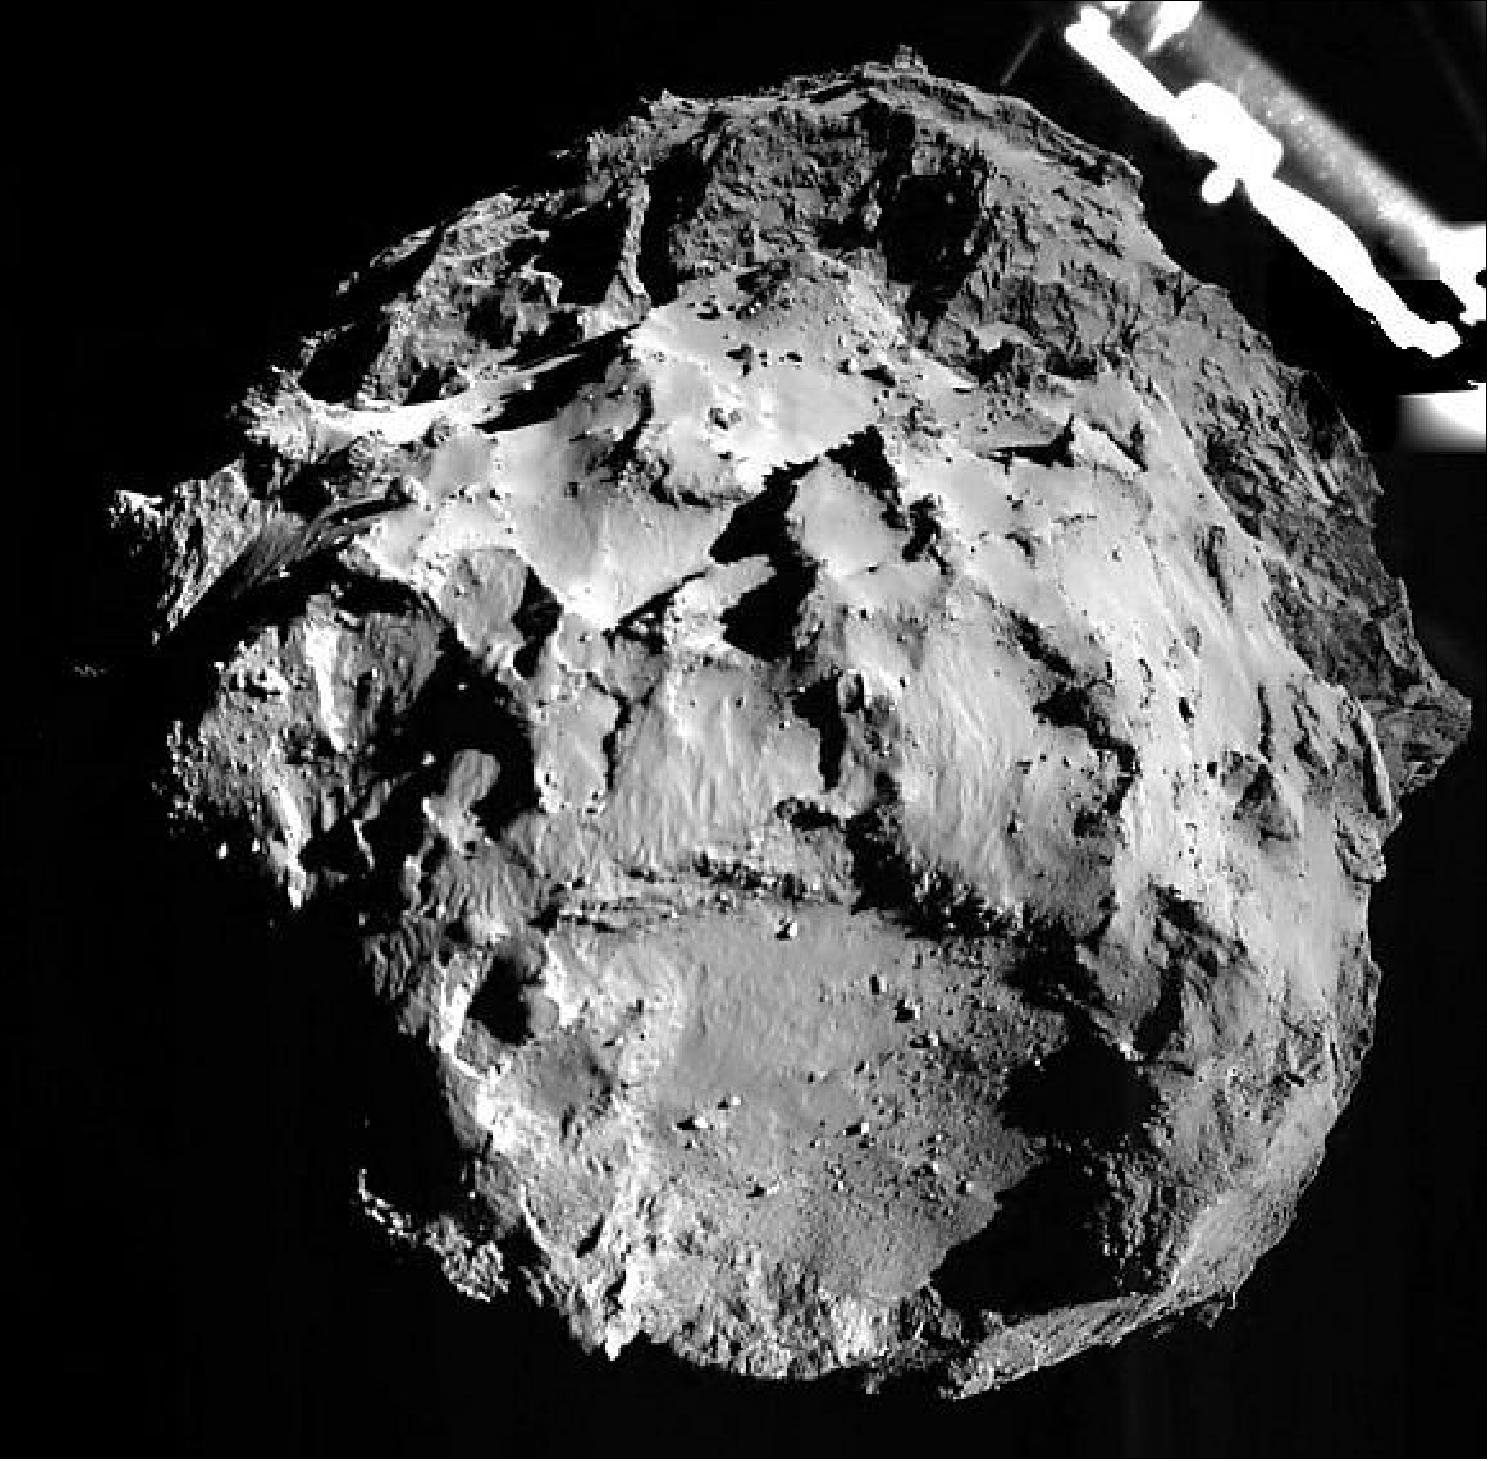 Figure 160: First photo released of Comet 67P/C-G taken by the ROLIS camera of Philae during its descent on Nov. 12 at 14:38:41 UTC from a distance of ~3 km from the surface. The landing site is imaged with a resolution of about 3 m per pixel (image credit: DLR) 241)